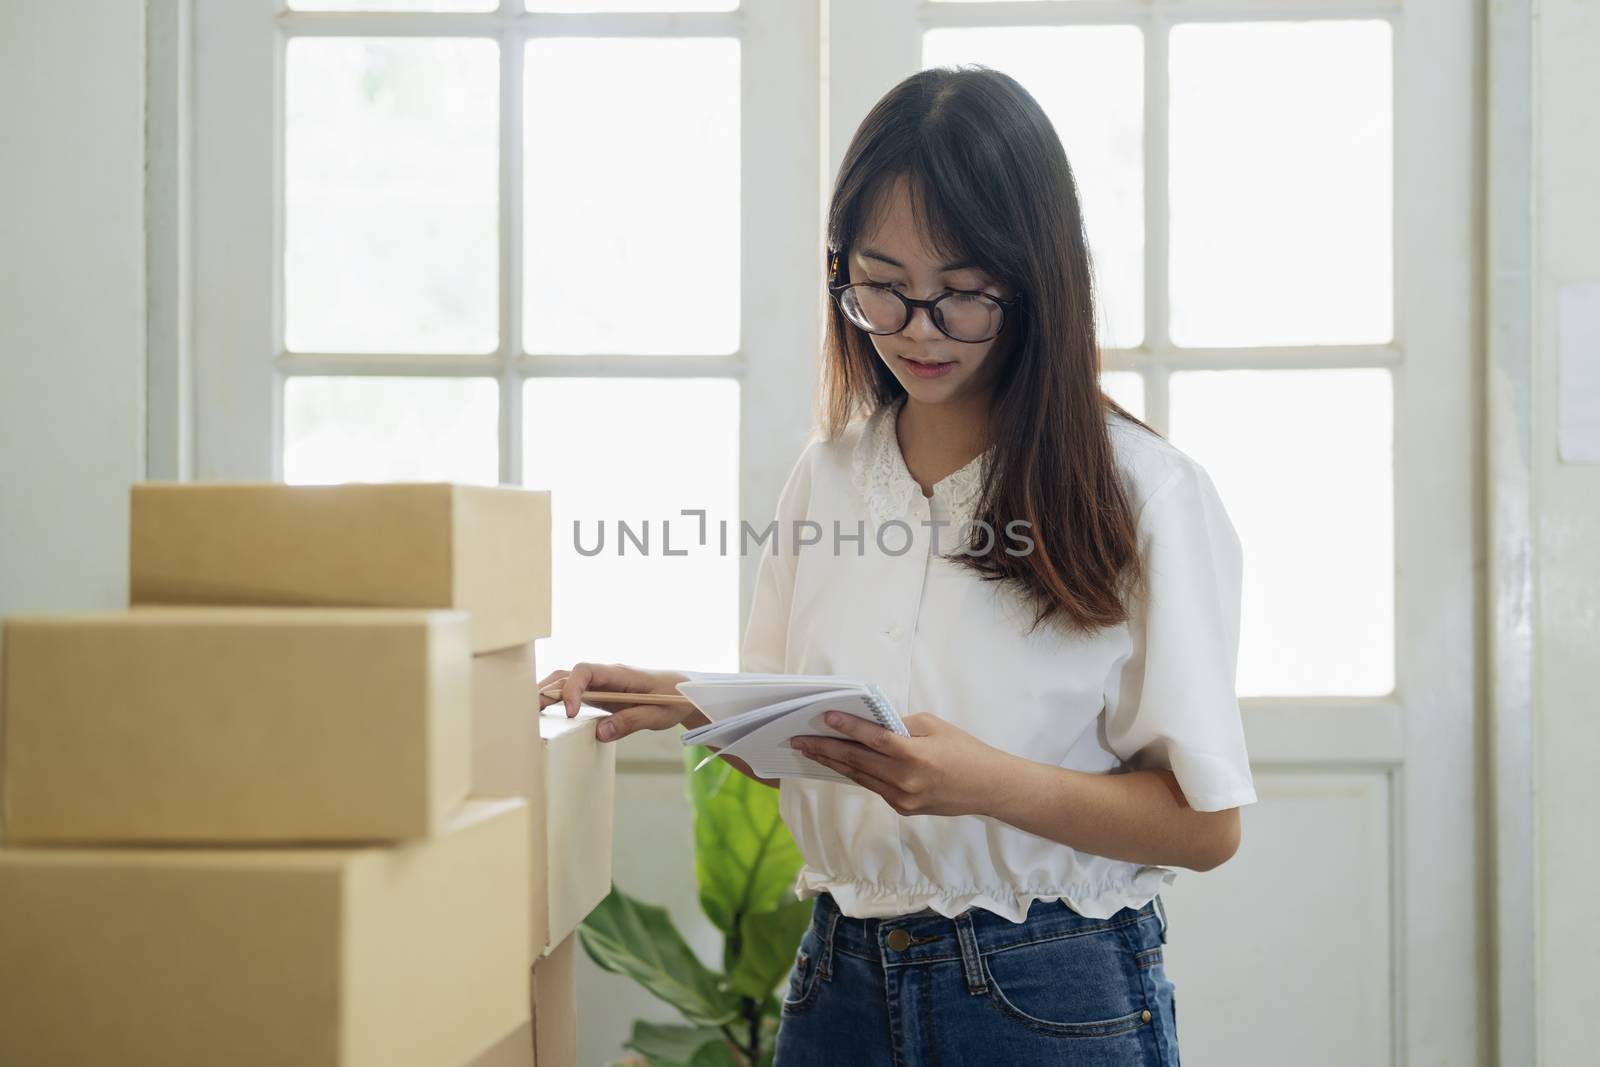 Shipping shopping online. Young entrepreneur working online e-commerce shopping at her shop. Young online seller checking order from customer and prepare parcel box deliver to customers. Online selling and online business e-commerce concept.